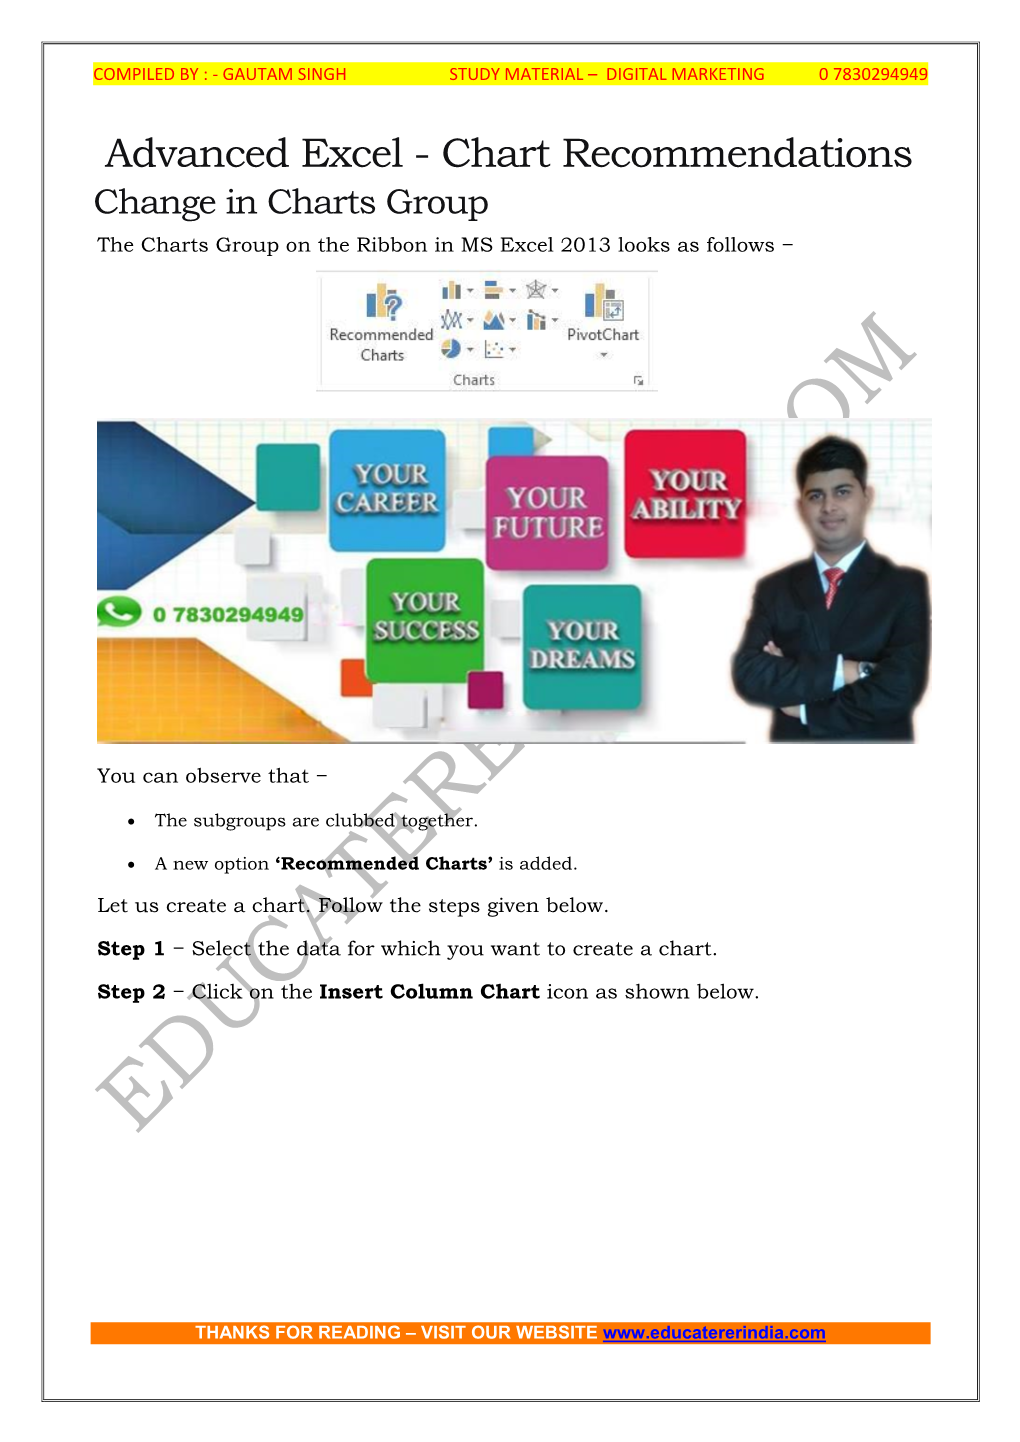 Advanced Excel - Chart Recommendations Change in Charts Group the Charts Group on the Ribbon in MS Excel 2013 Looks As Follows −